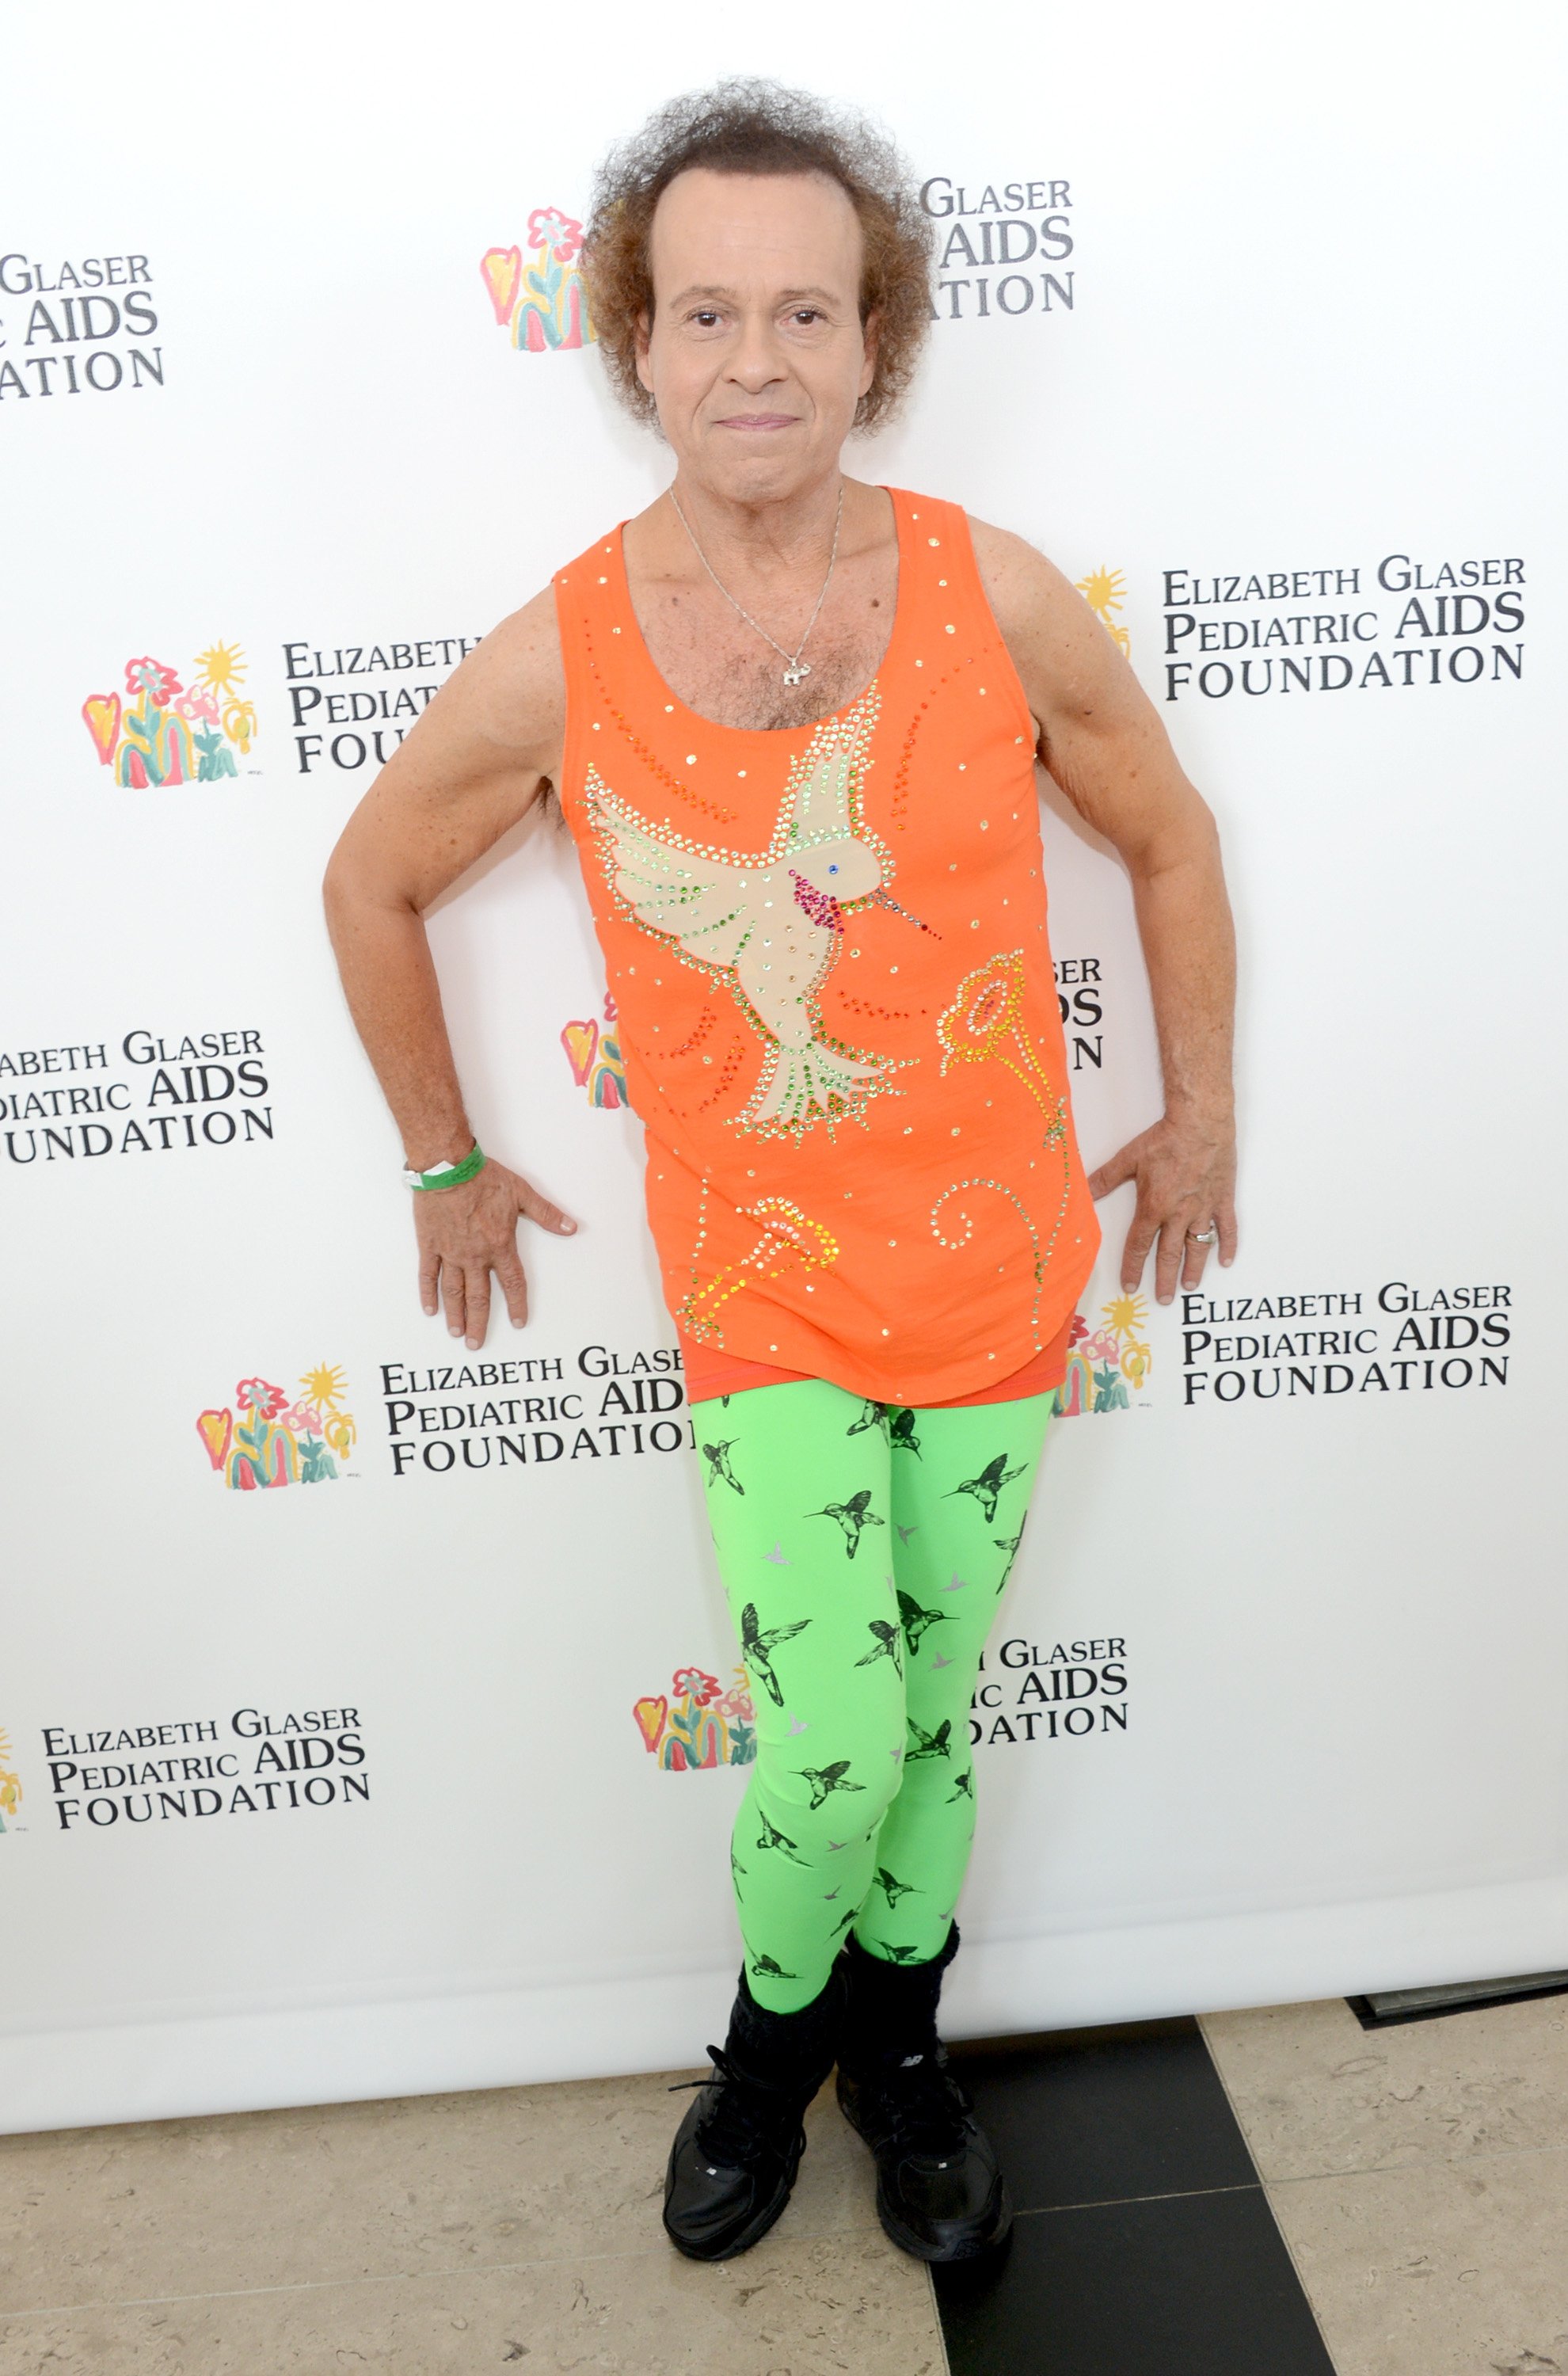 Richard Simmons attends the Elizabeth Glaser Pediatric AIDS Foundation's 24th Annual 'A Time For Heroes' at Century Park on June 2, 2013 in Los Angeles